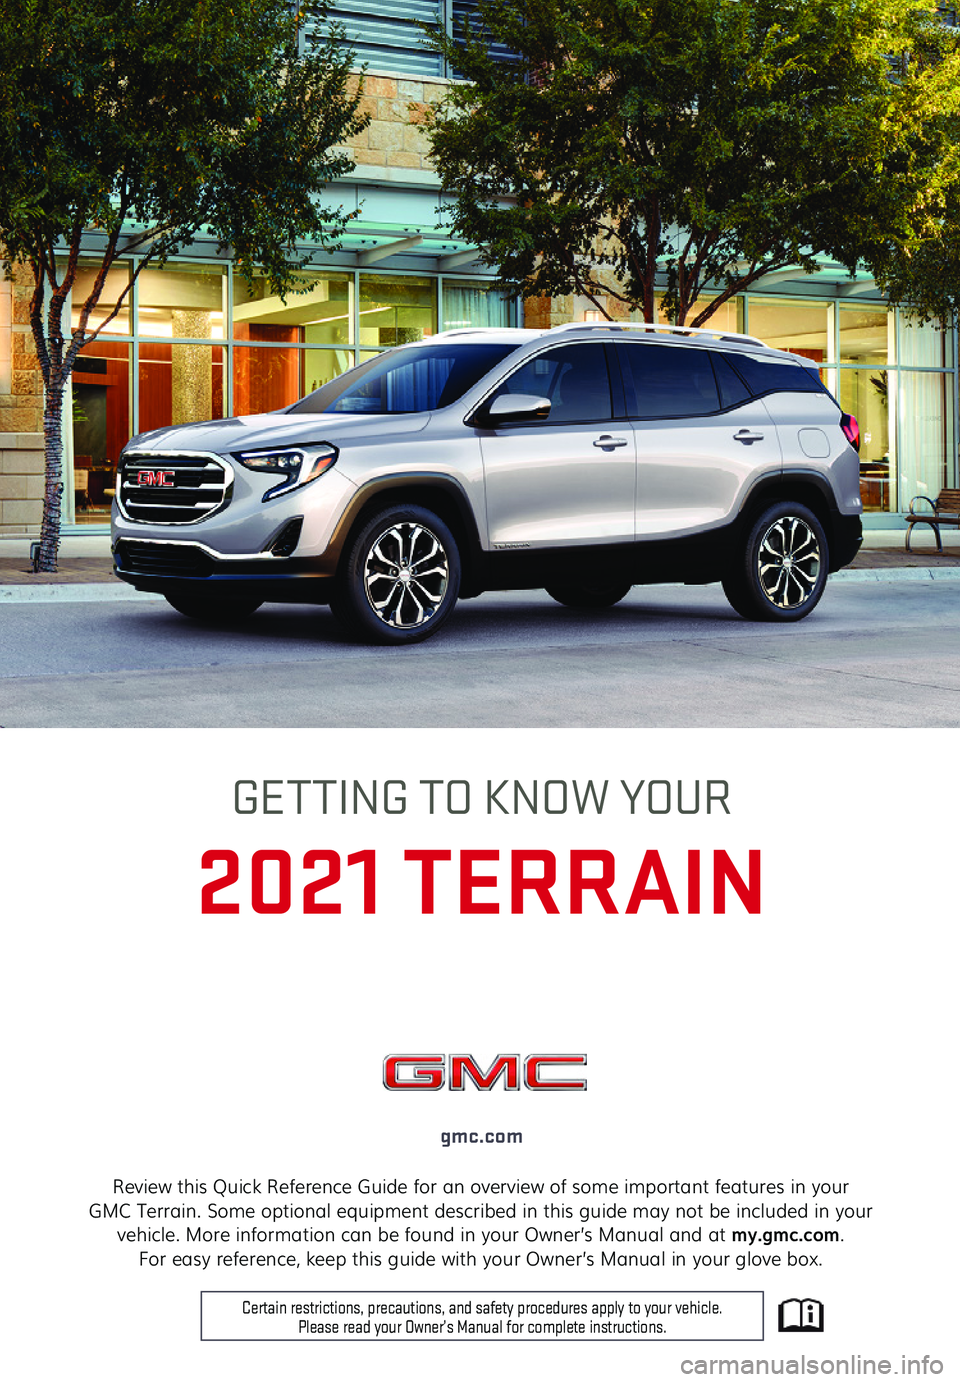 GMC TERRAIN 2021  Get To Know Guide 1
Review this Quick Reference Guide for an overview of some important features in your  GMC Terrain. Some optional equipment described in this guide may not be included in your vehicle. More informati